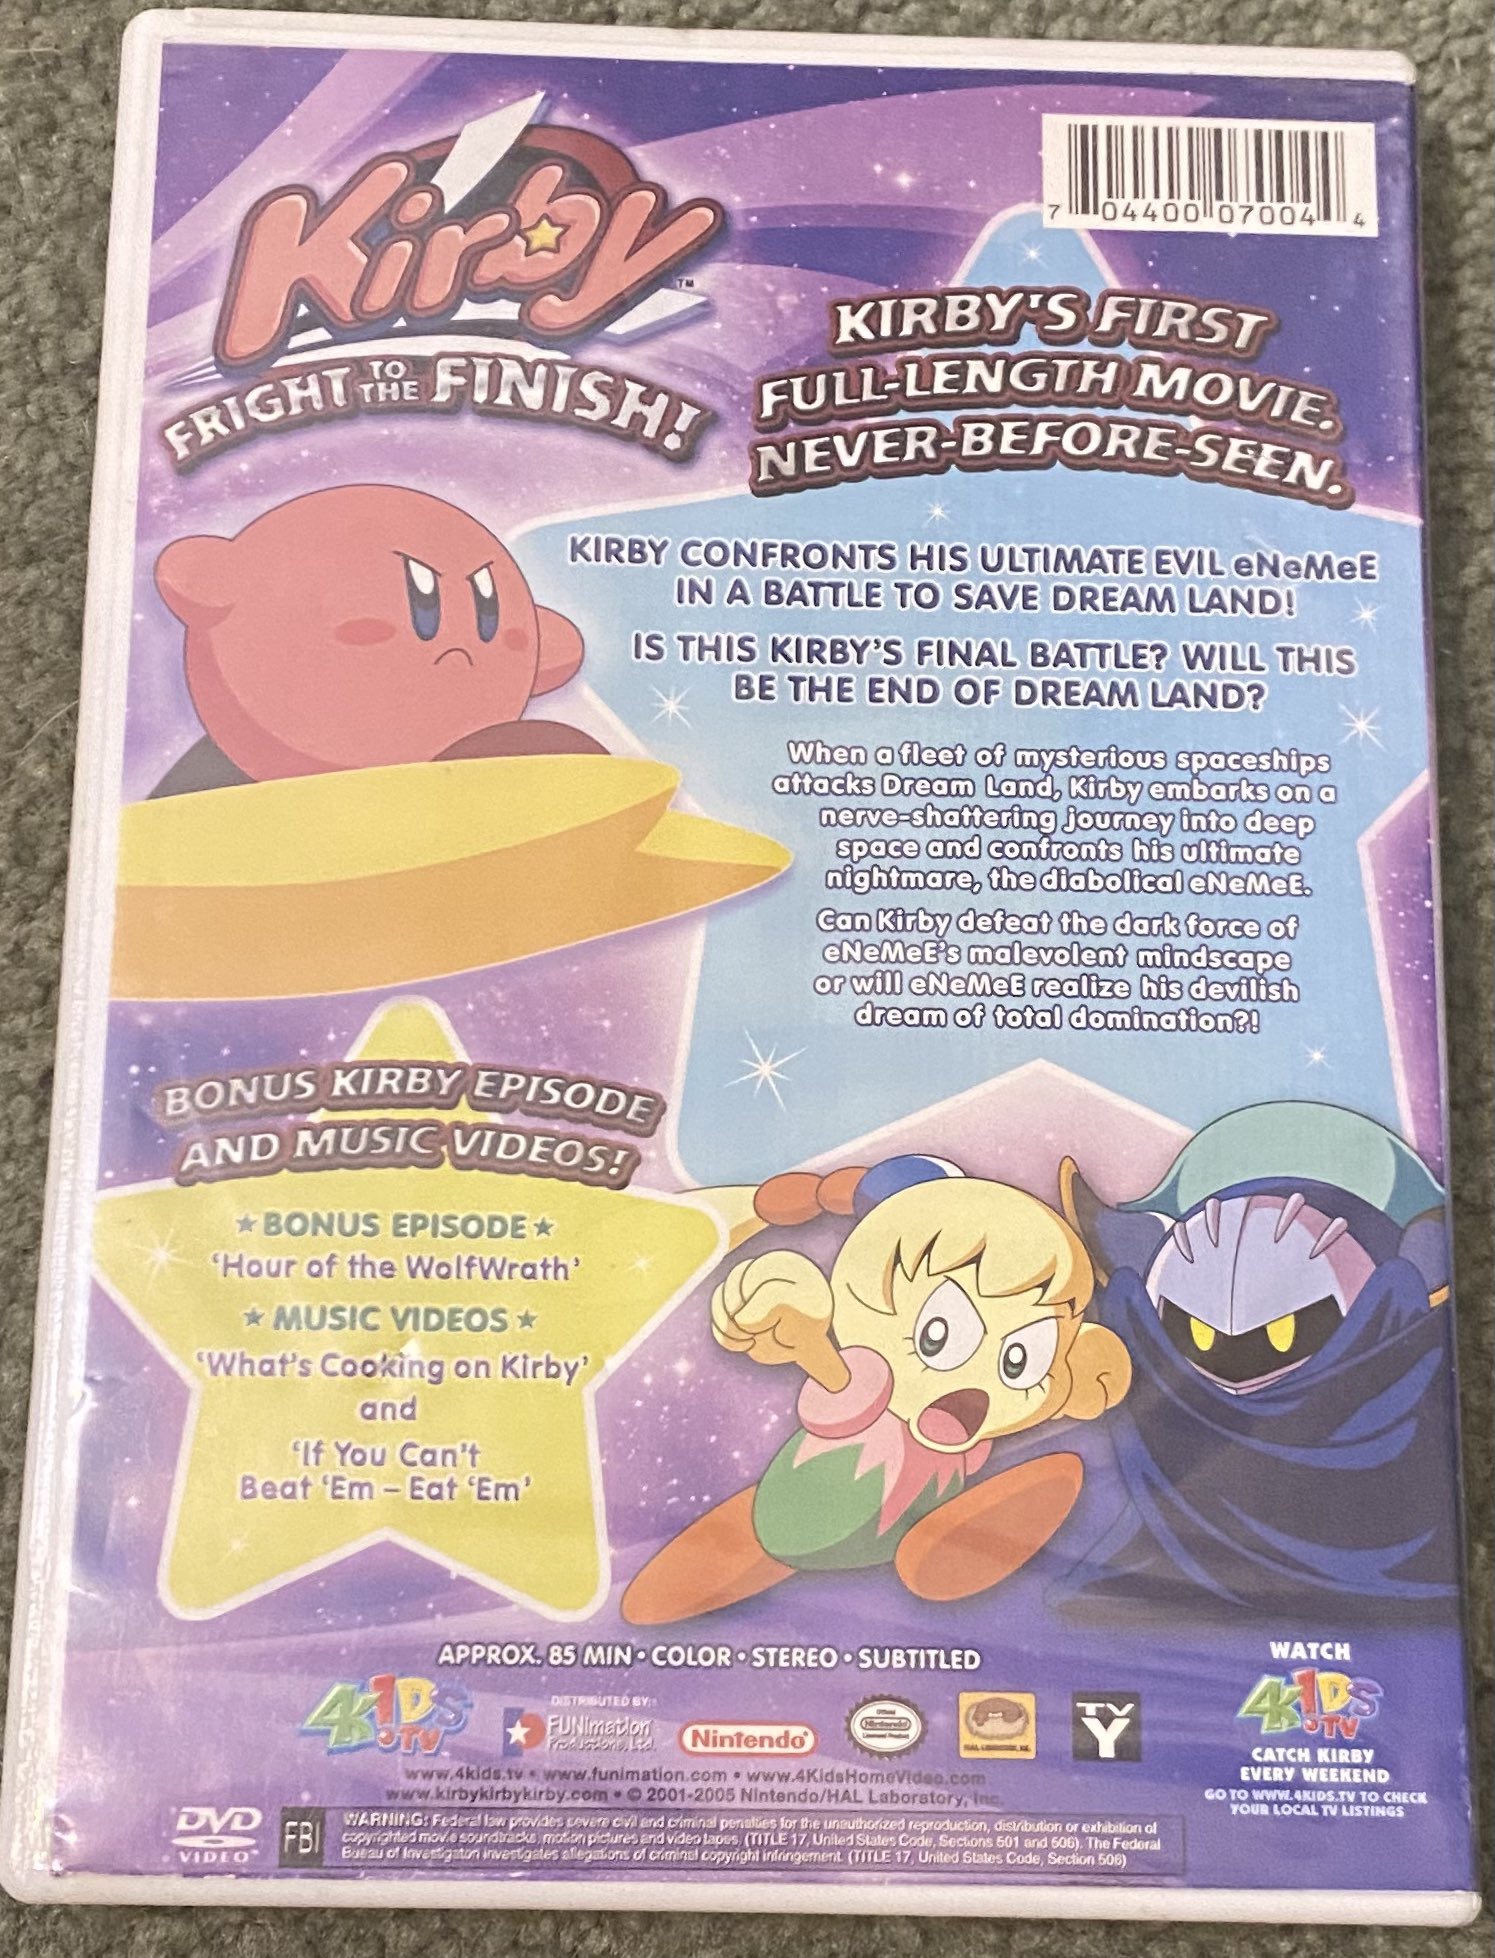 KIRBY RIGHT BACK AT YA! Complete English Dub Series DVD Set – RetroAnimation